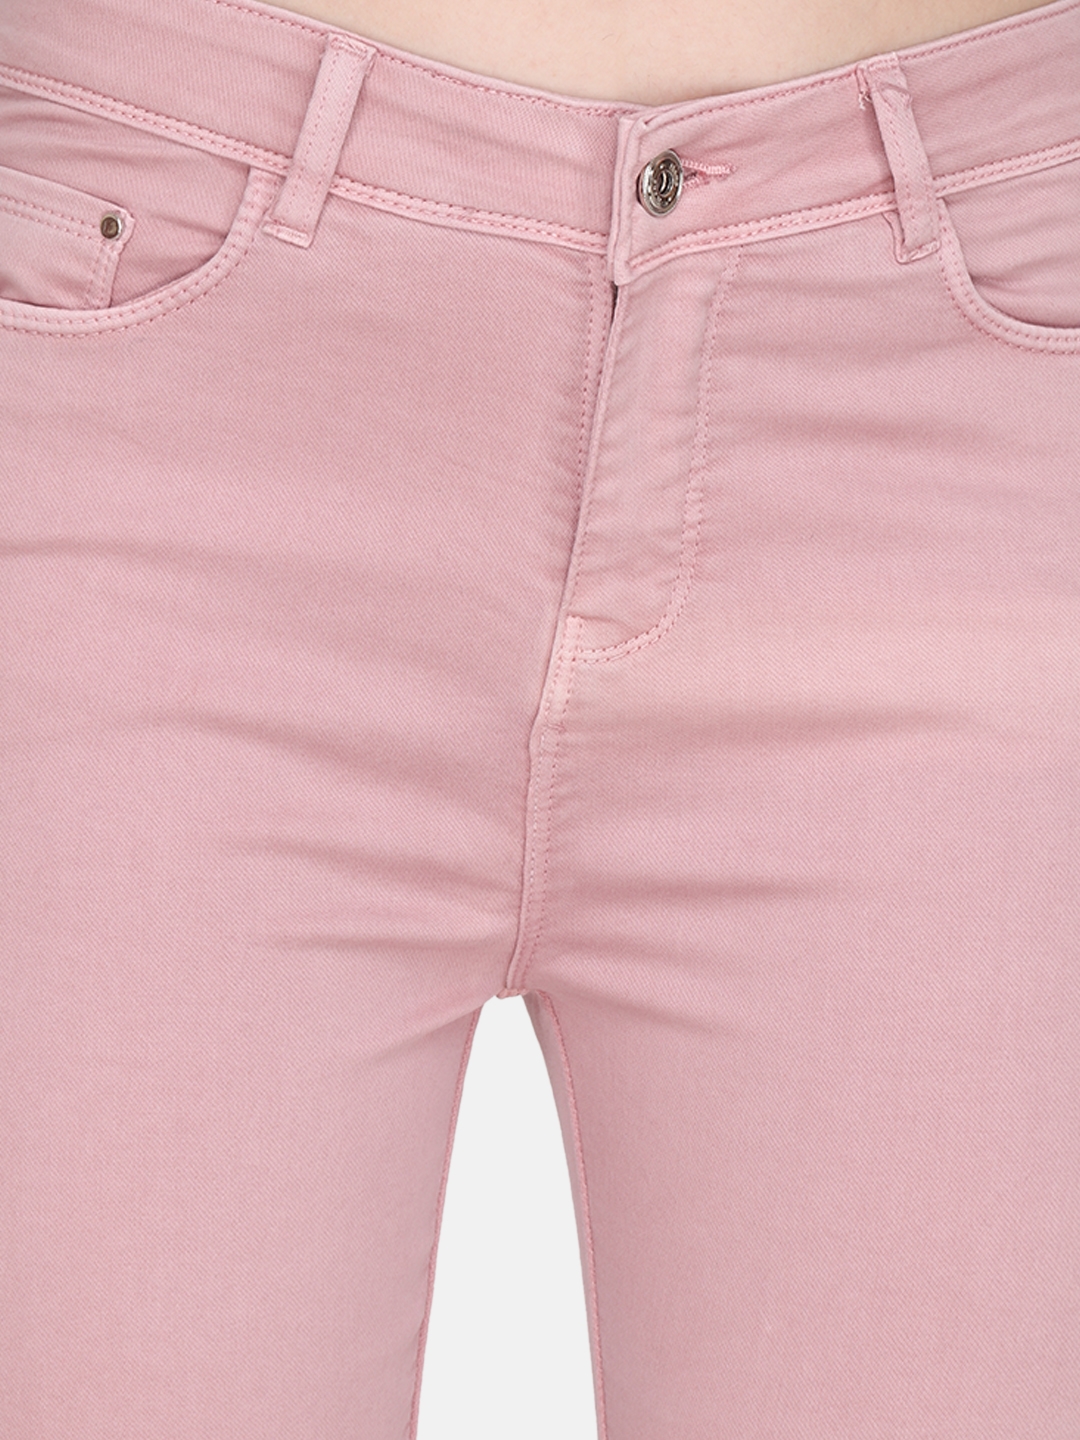 Albion | Albion By CnM Women Pink Denim Stretchable Jeans 4